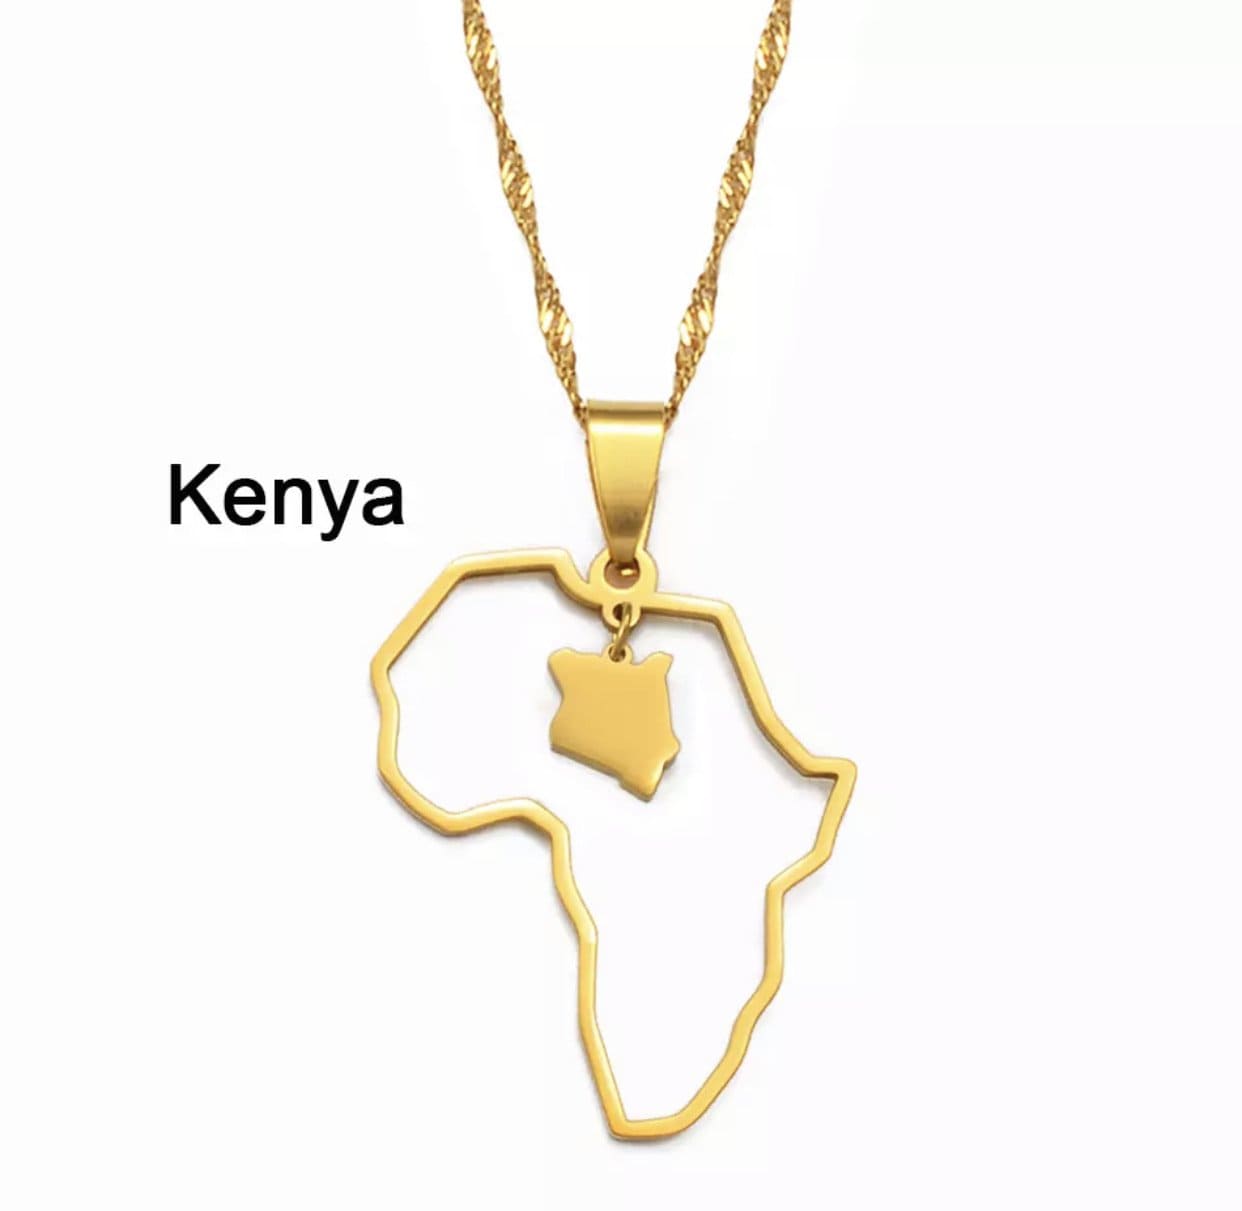 Veryldesigns Necklace Kenya Custom African country Necklace